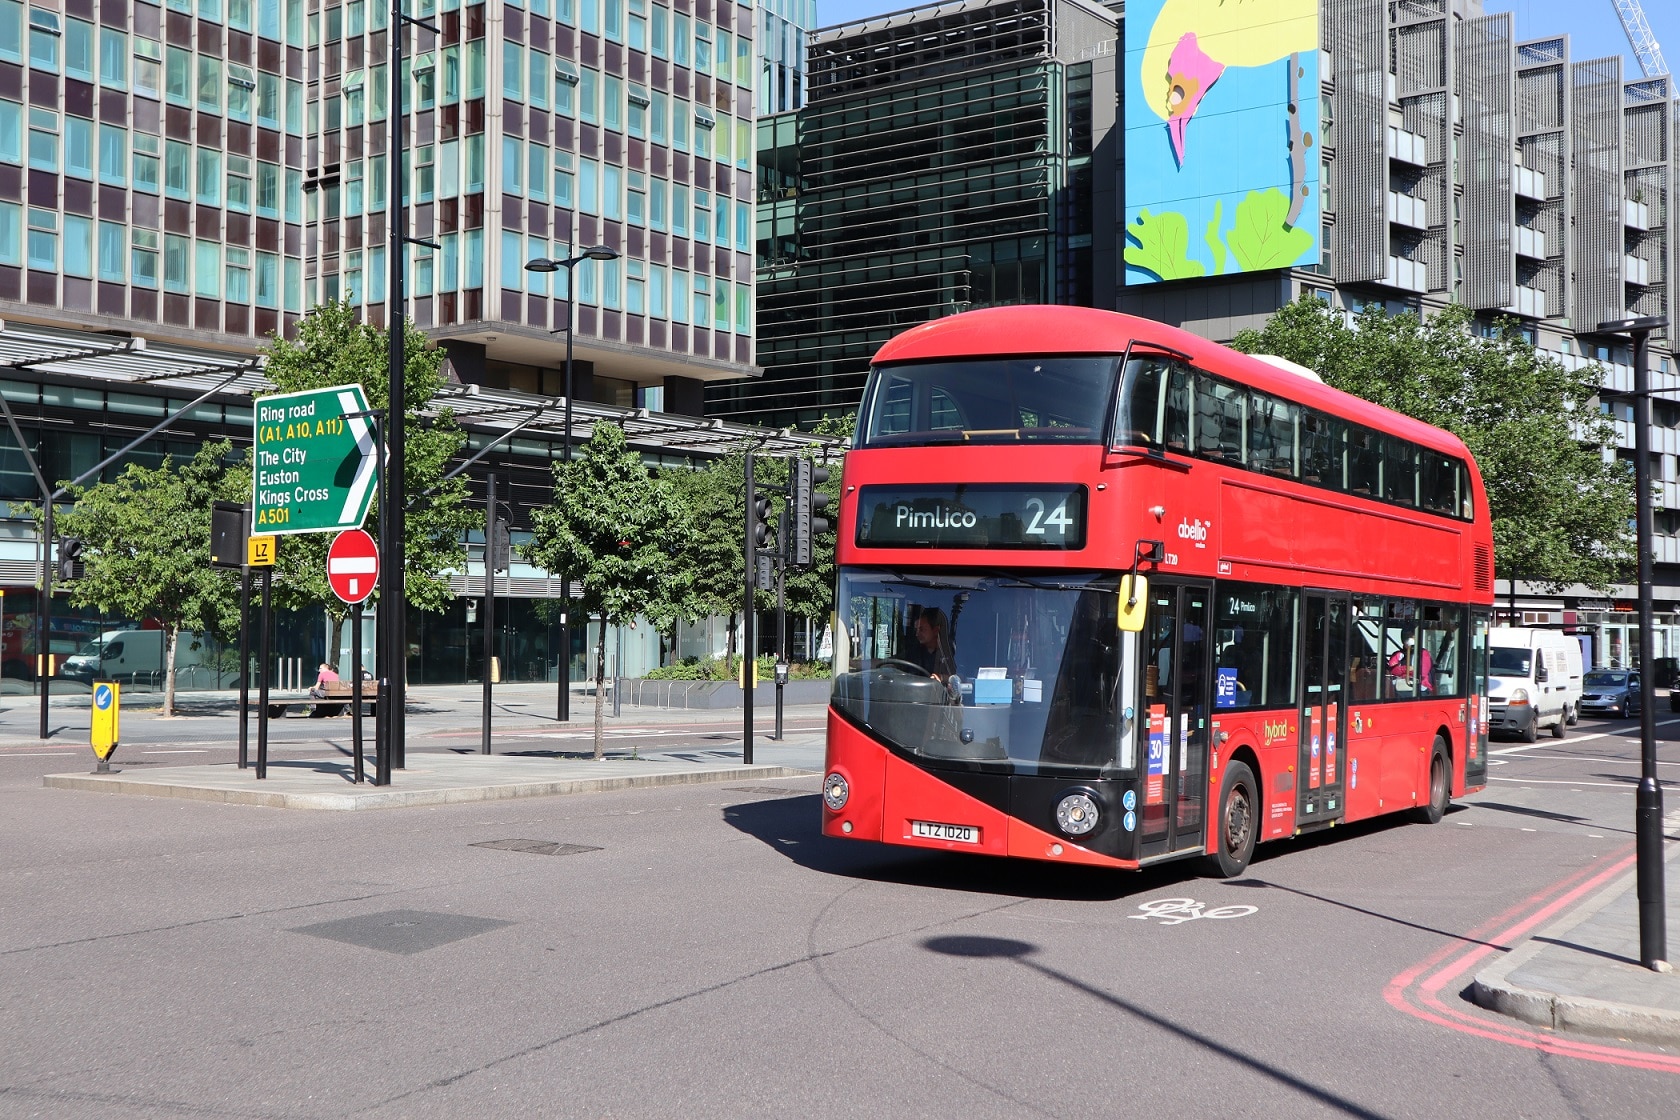 TfL opens consultation into bus service changes